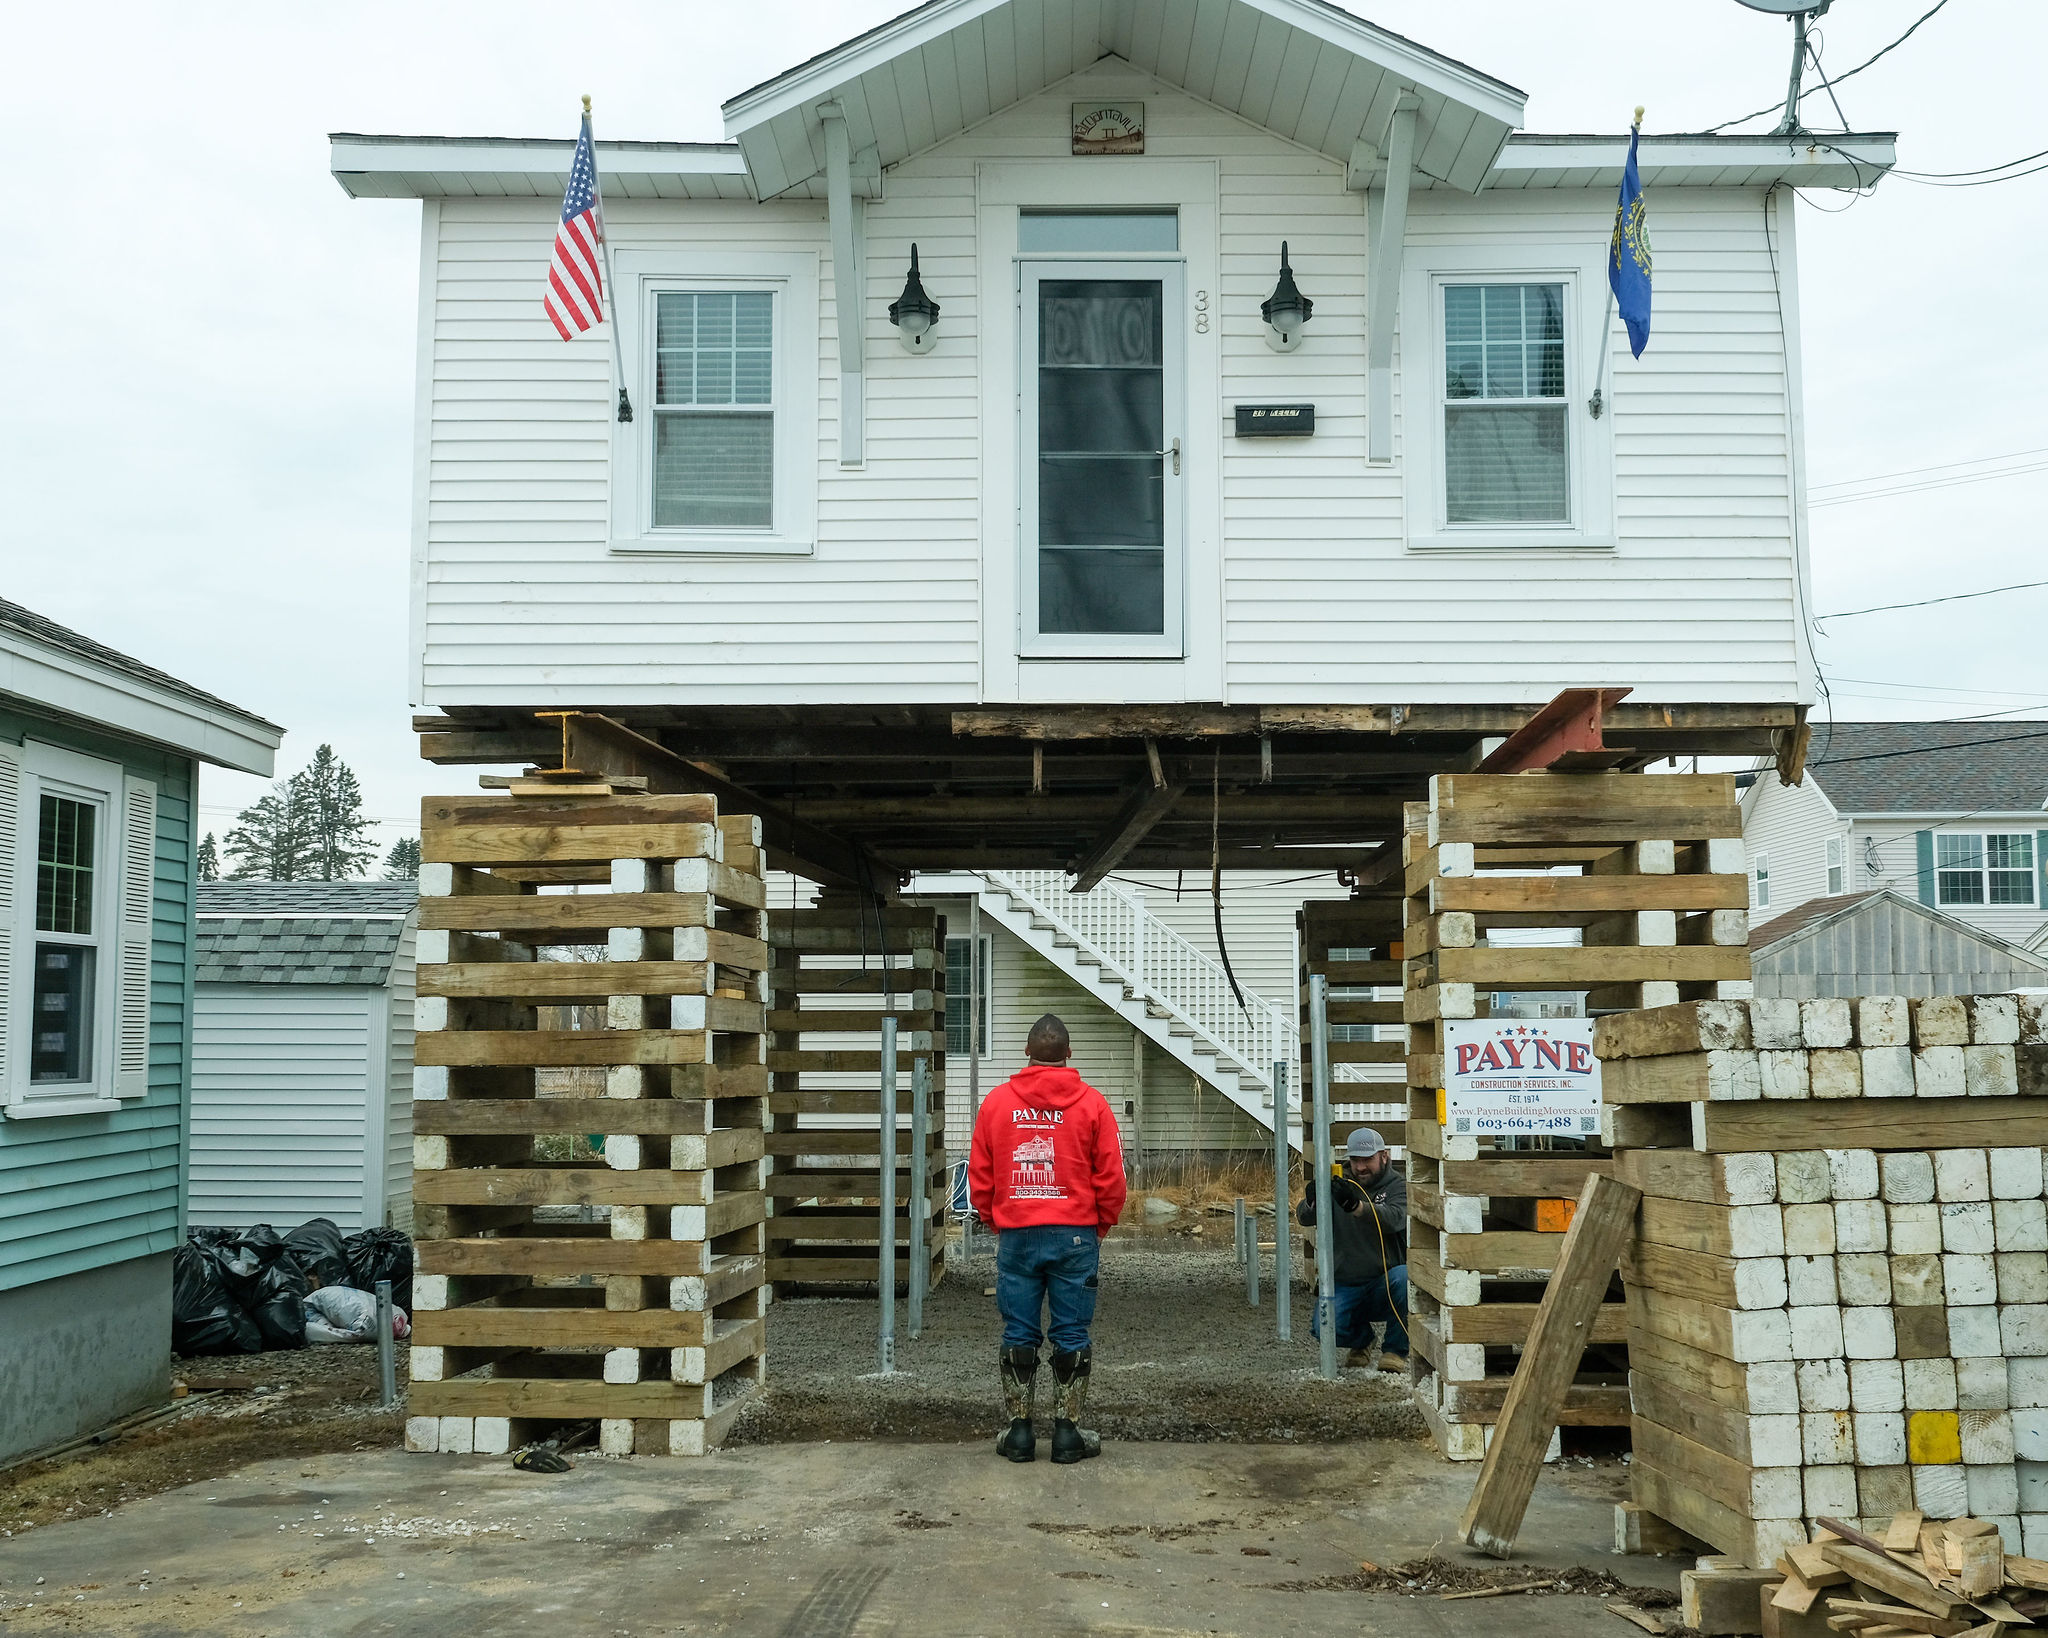 A man in a red sweatshirt is looking up at a white cottage elevated on wood pilings.